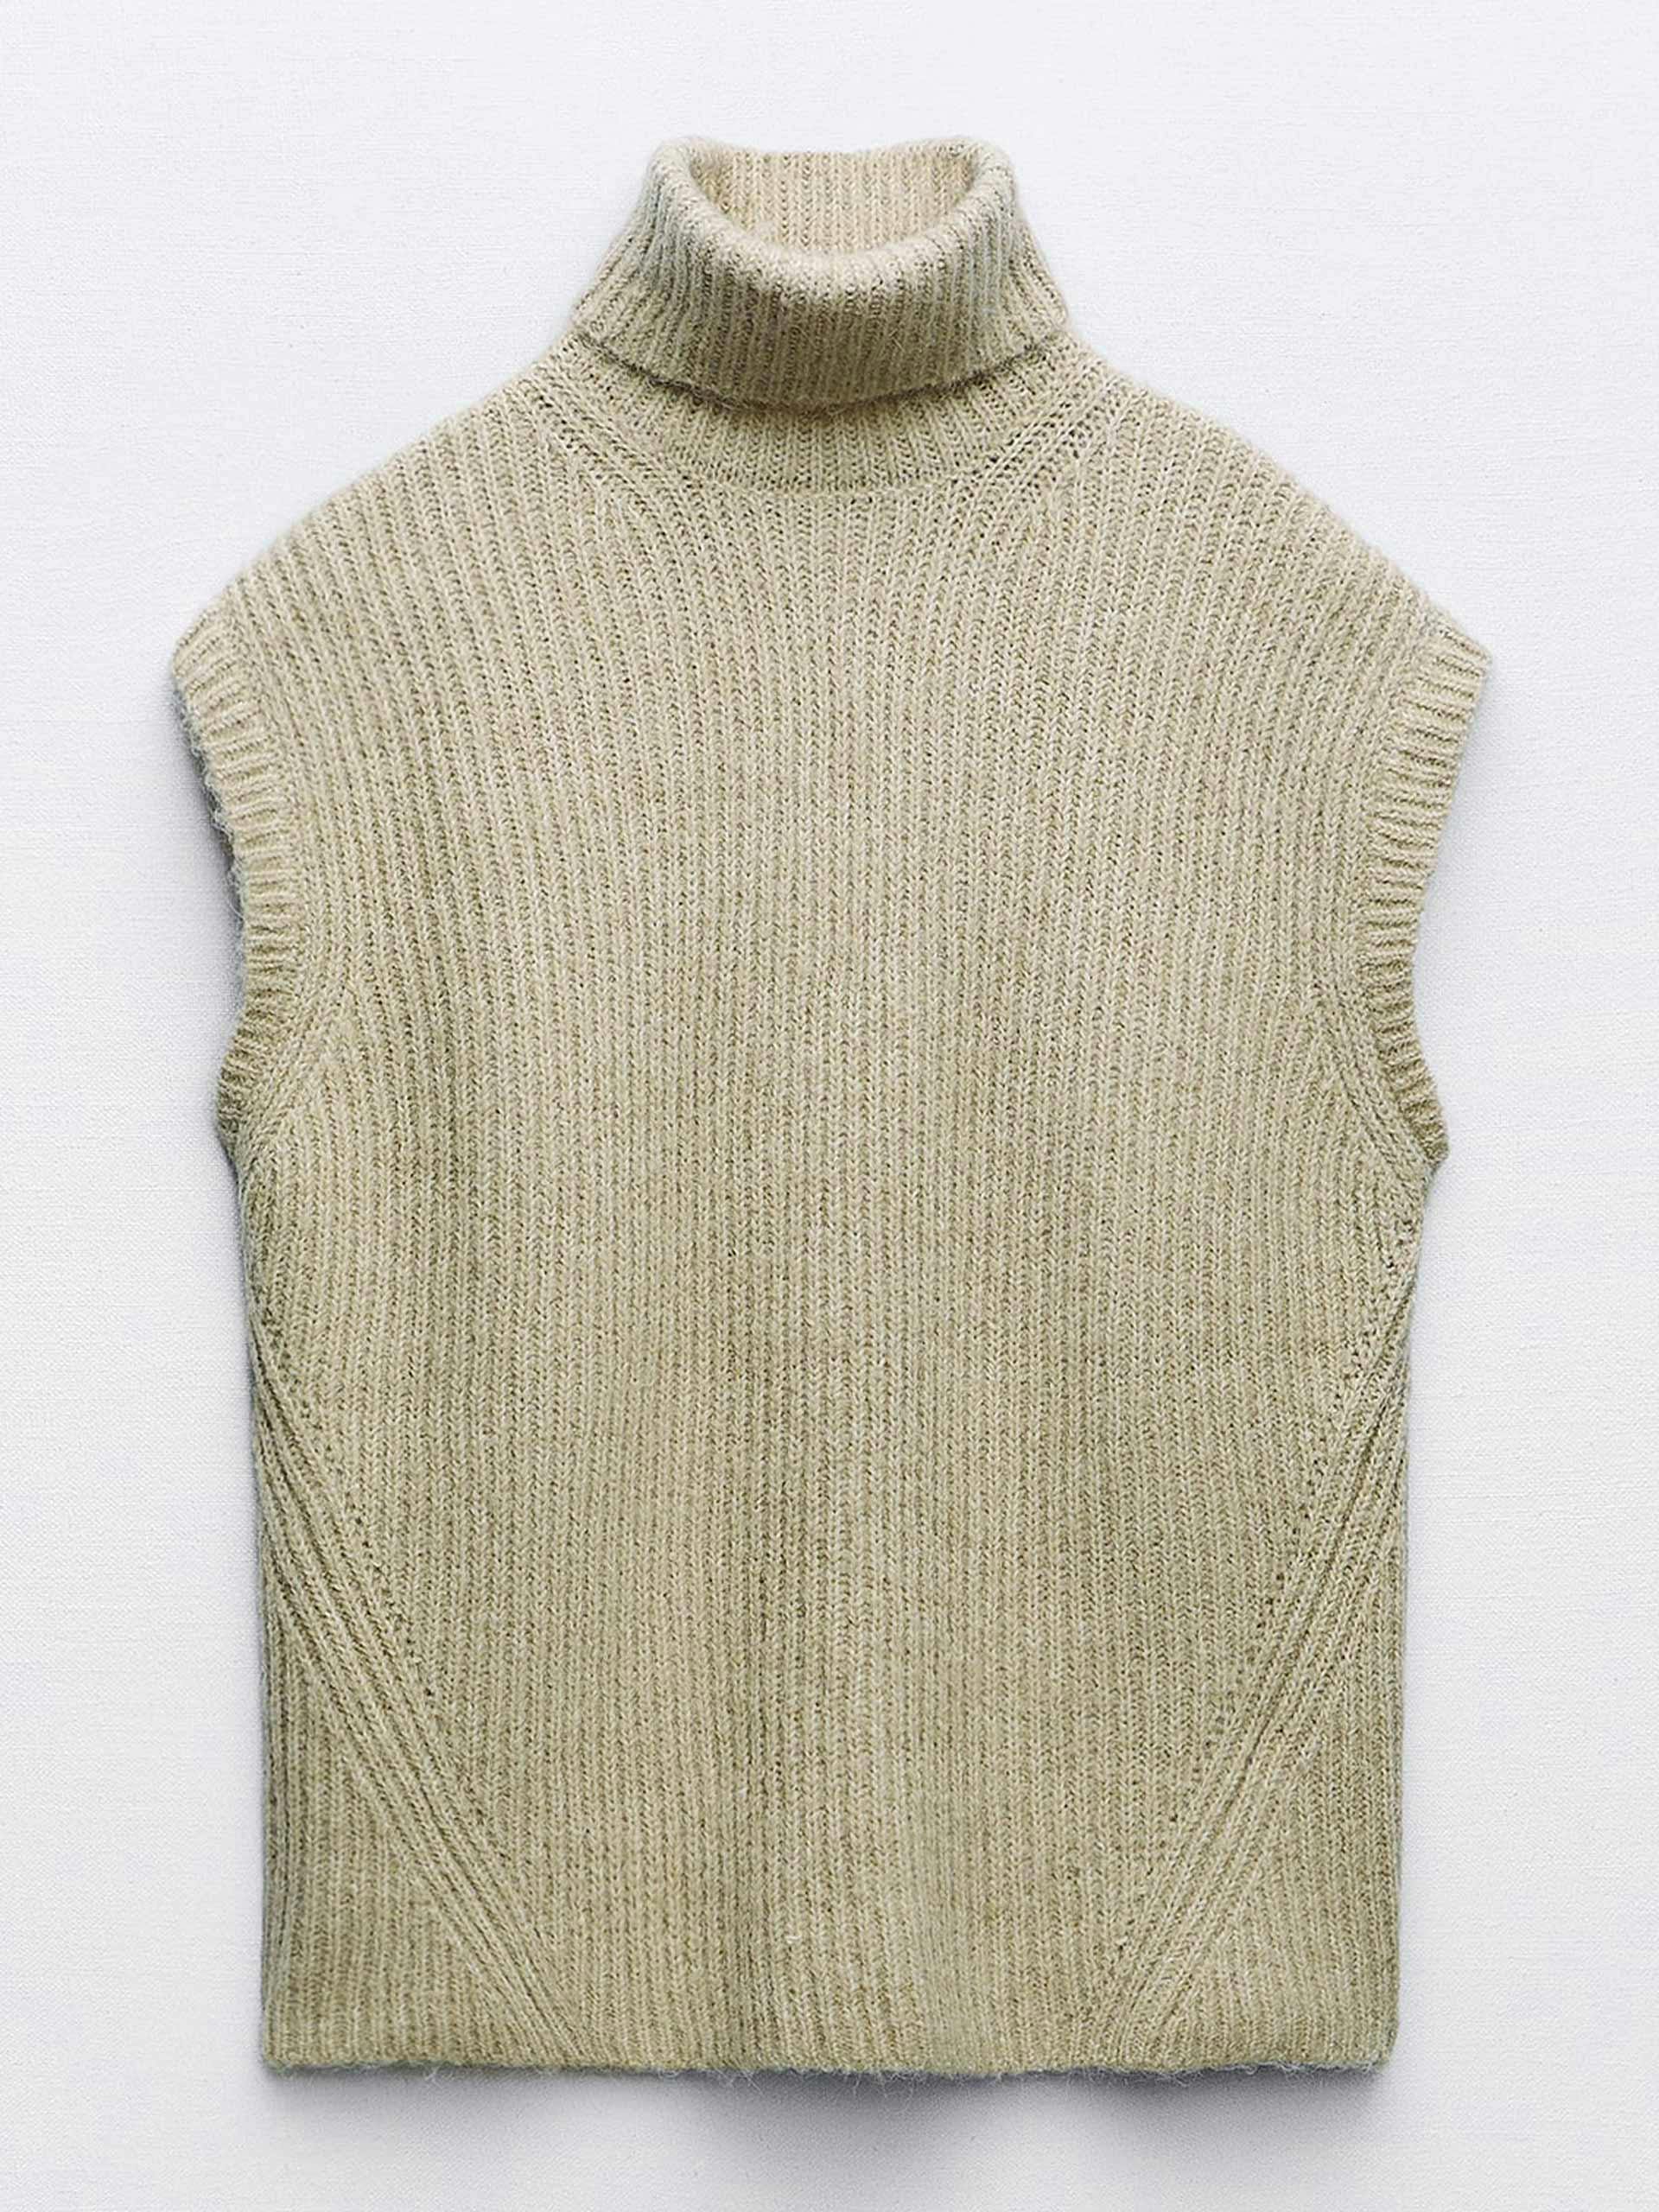 Knit cosy vest with open back